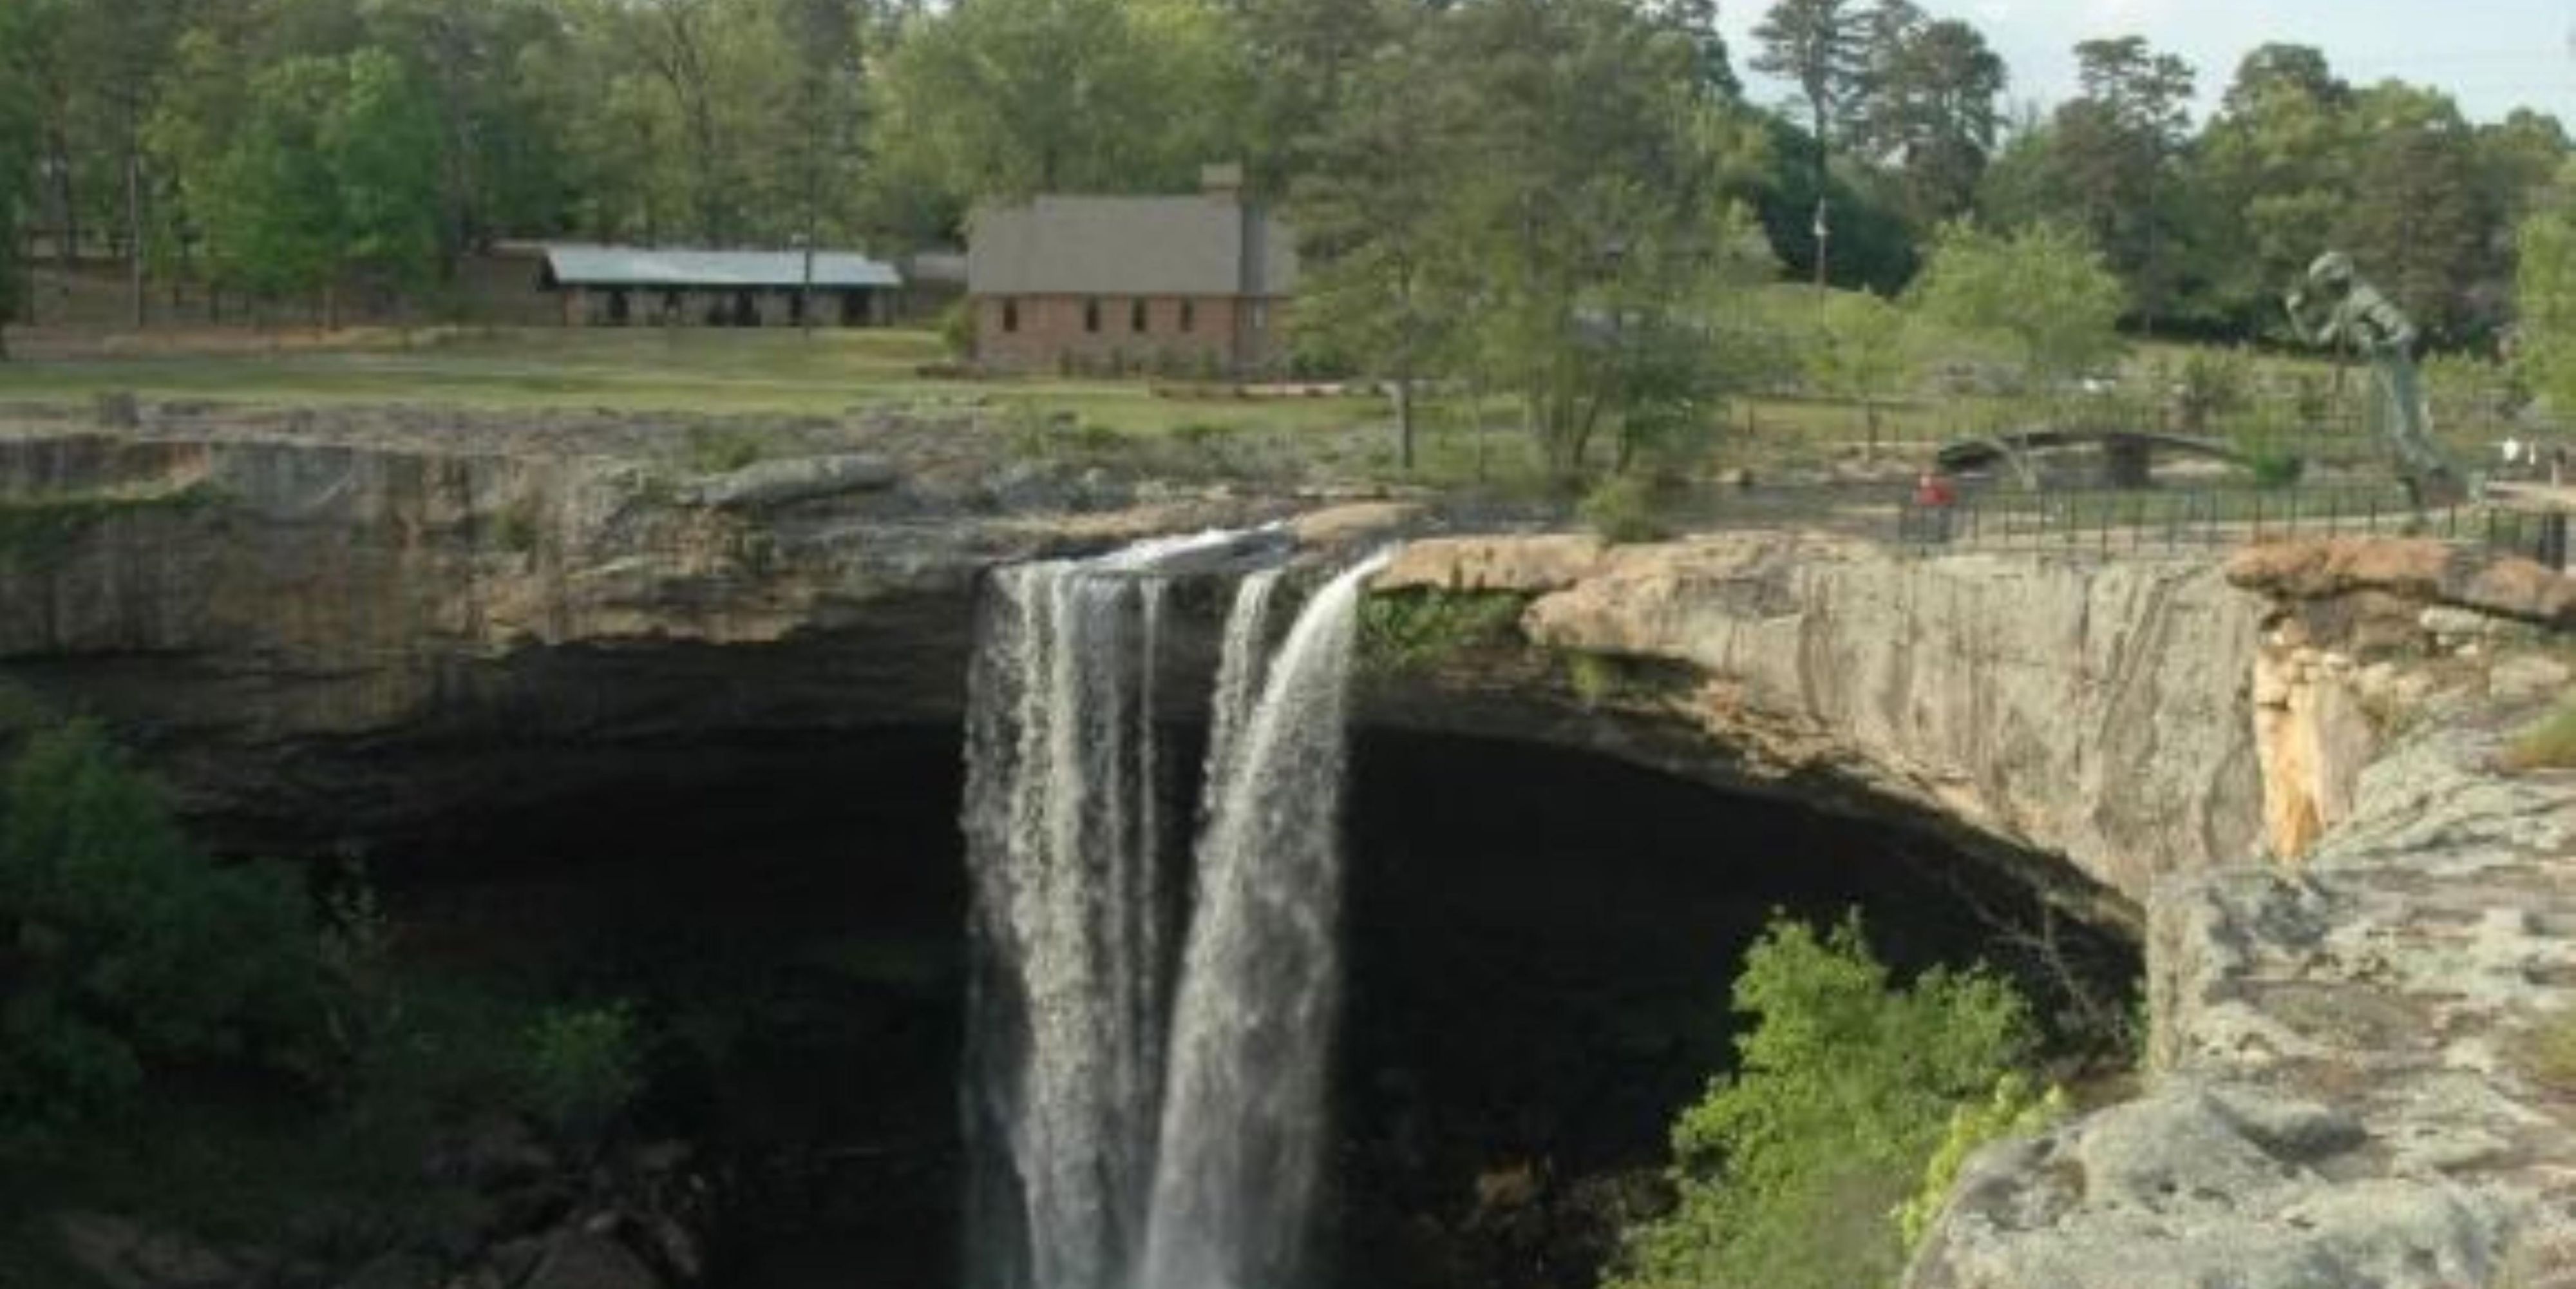 One of Alabama’s top attractions, Noccalula Falls Park welcomes thousands of visitors each year. The park features Black Creek walking, biking, and hiking trails, a petting zoo, botanical gardens, scenic train ride, mini-golf, fly fishing, and of course, the 90-foot Noccalula Waterfall.